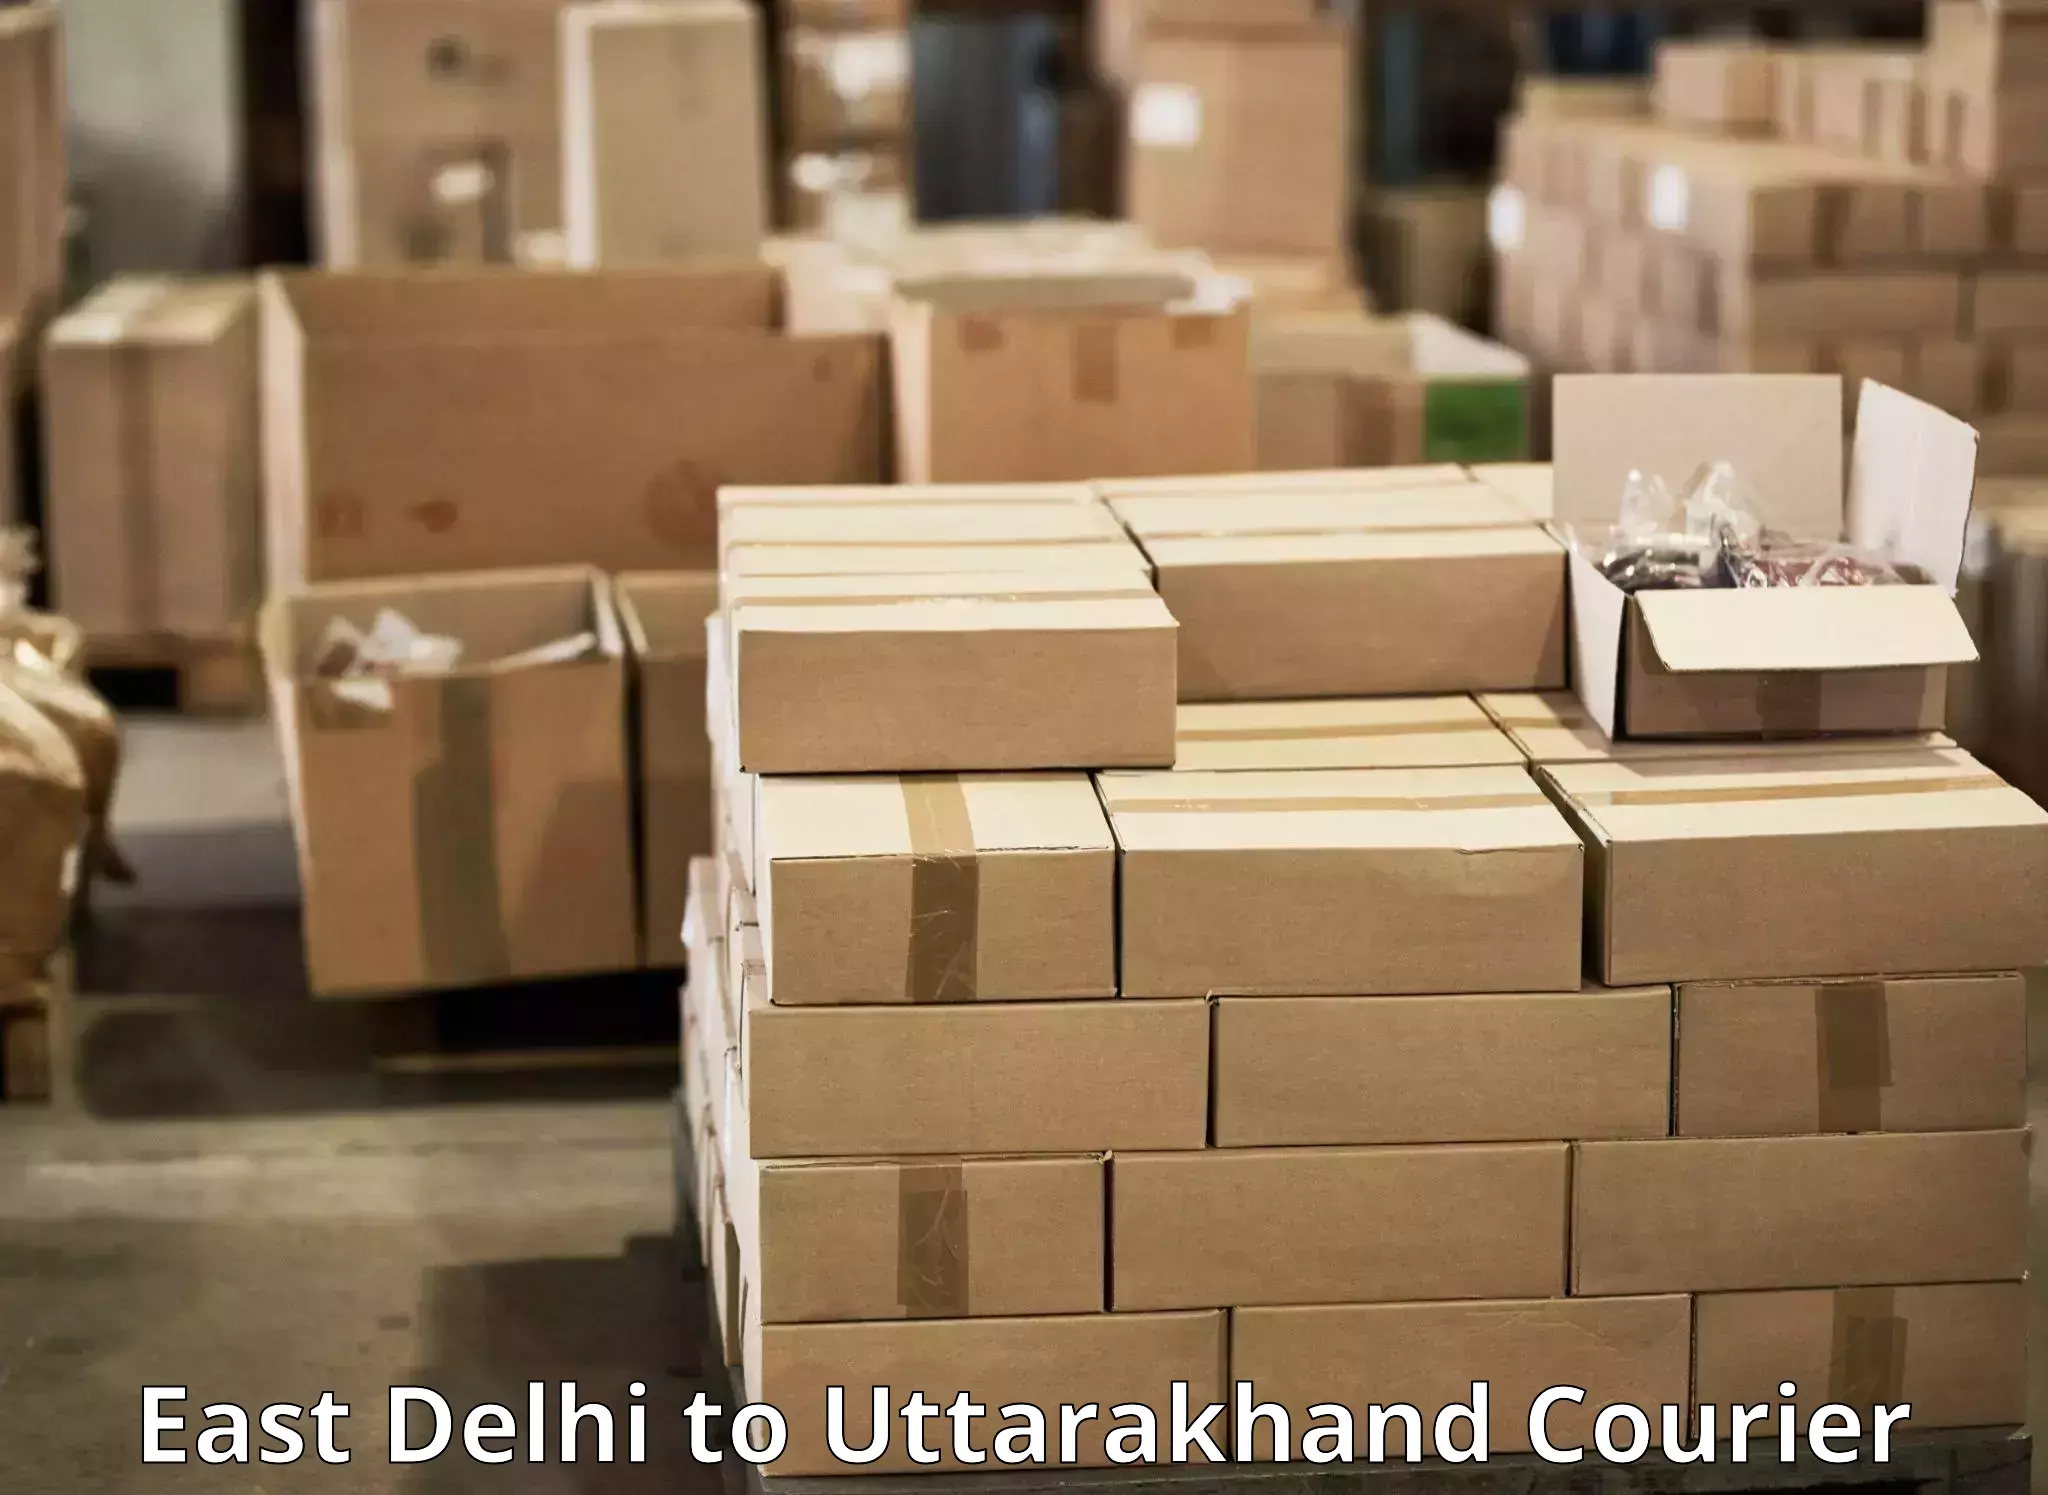 State-of-the-art courier technology East Delhi to Lohaghat